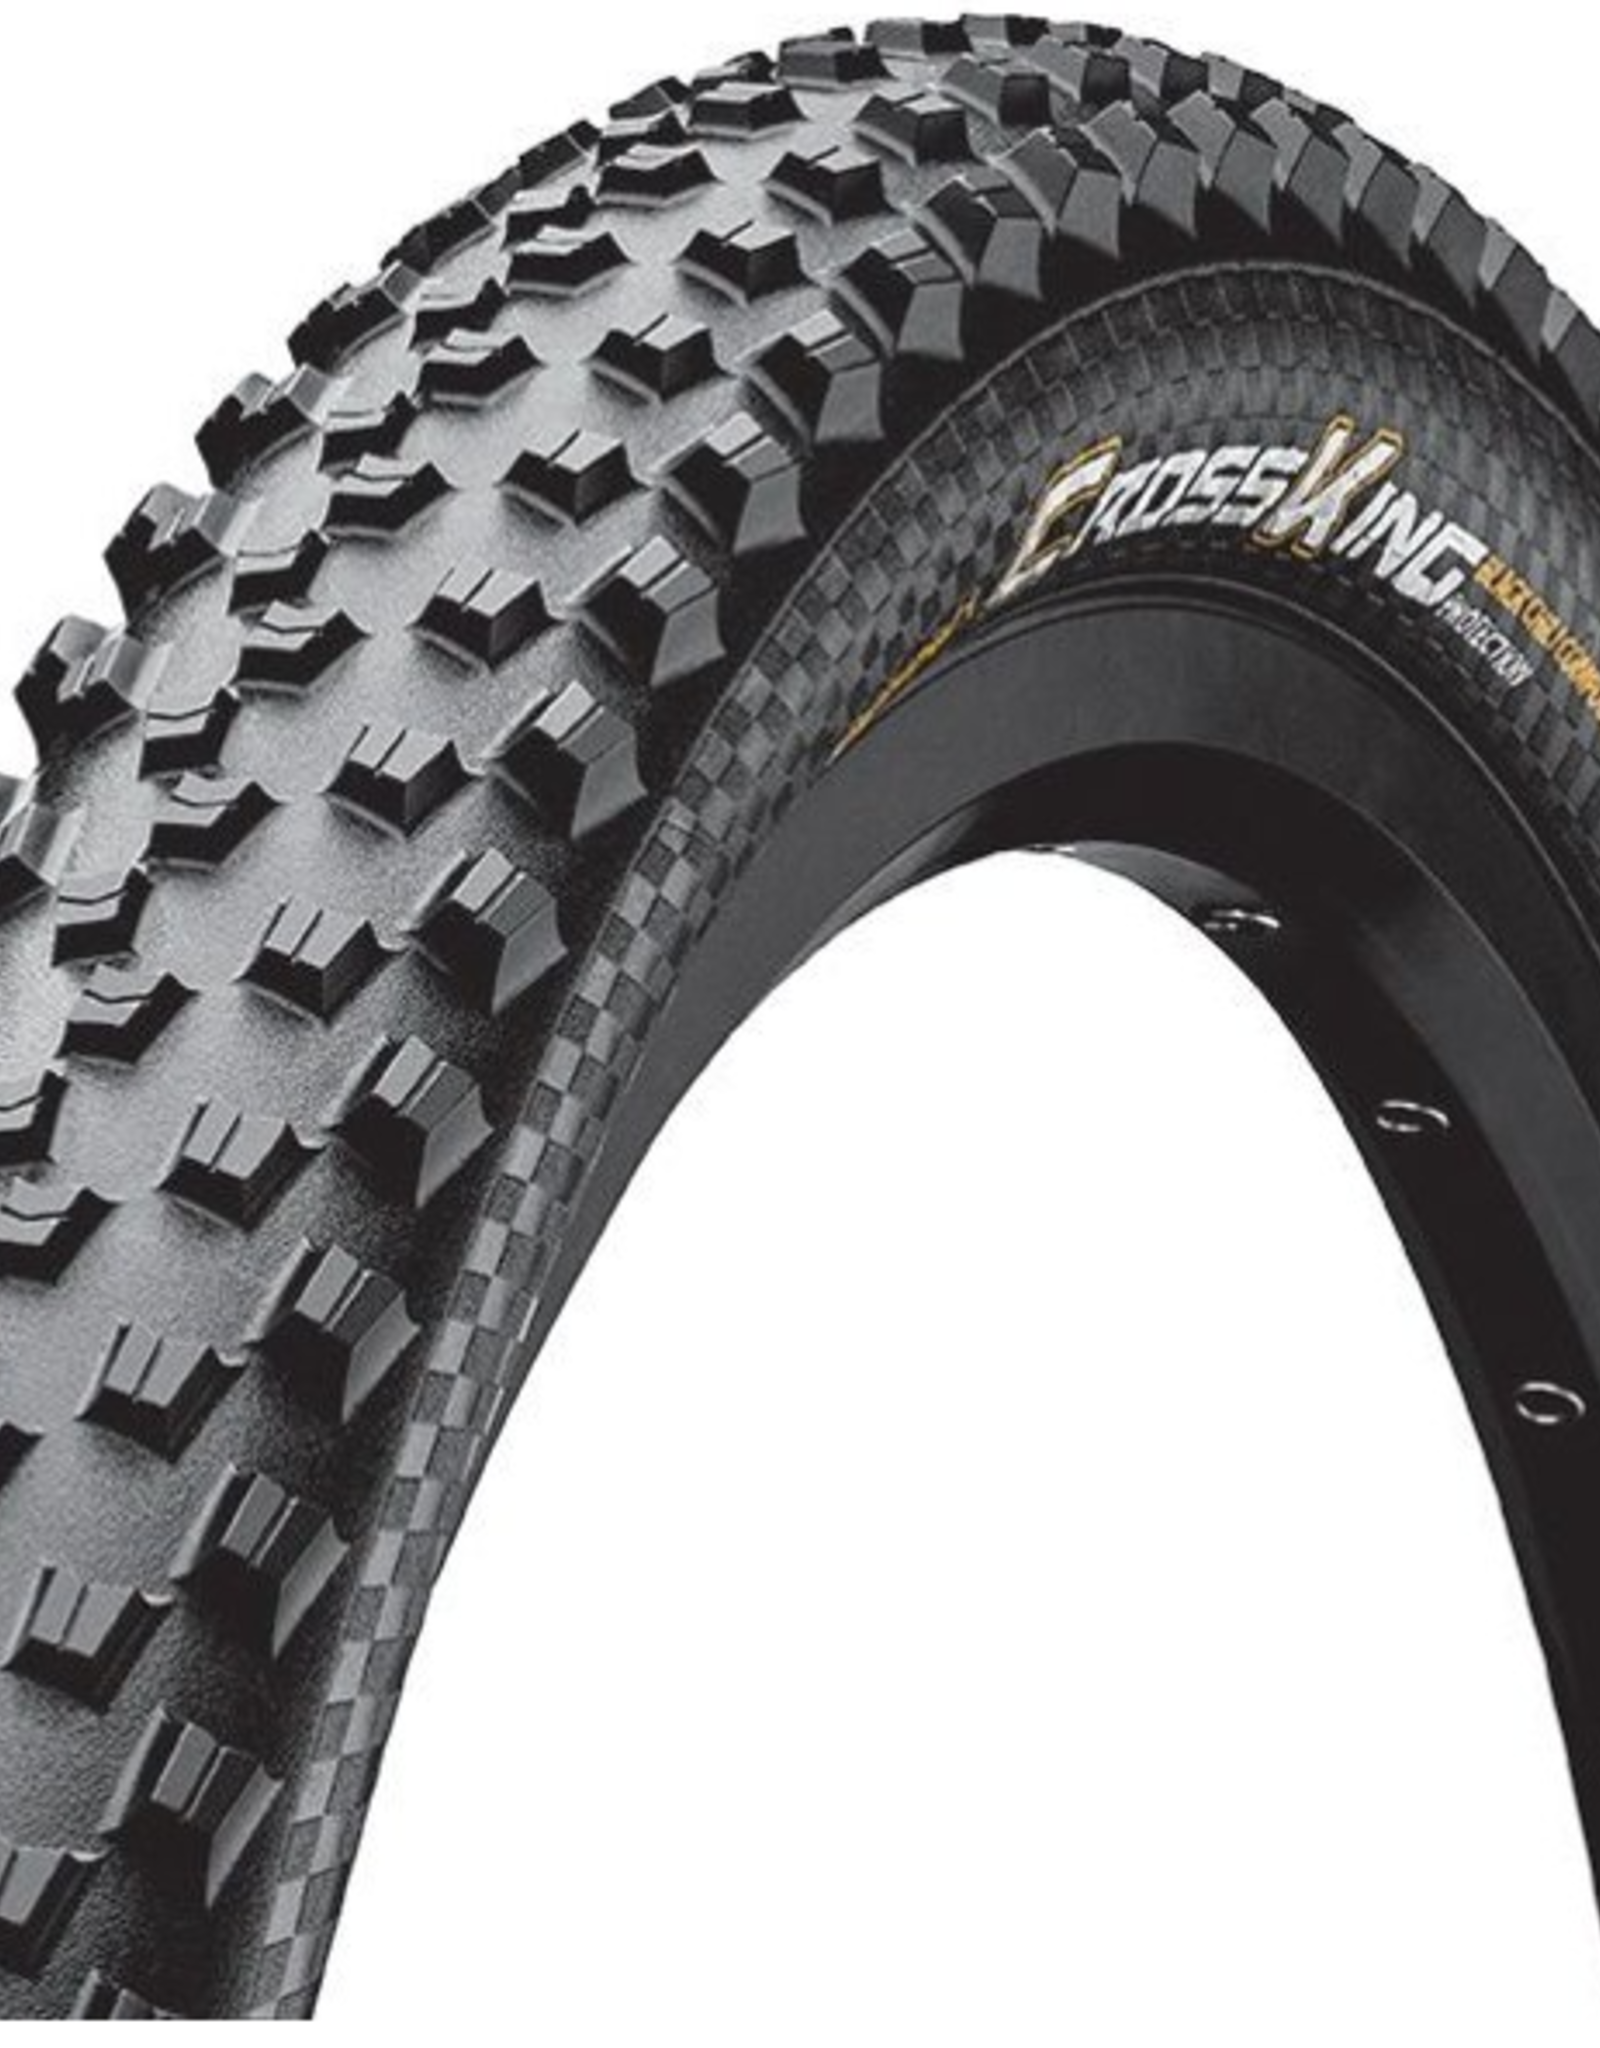 Continental Continental  Cross King 27.5 x 2.2 Folding ProTection + Black Chili